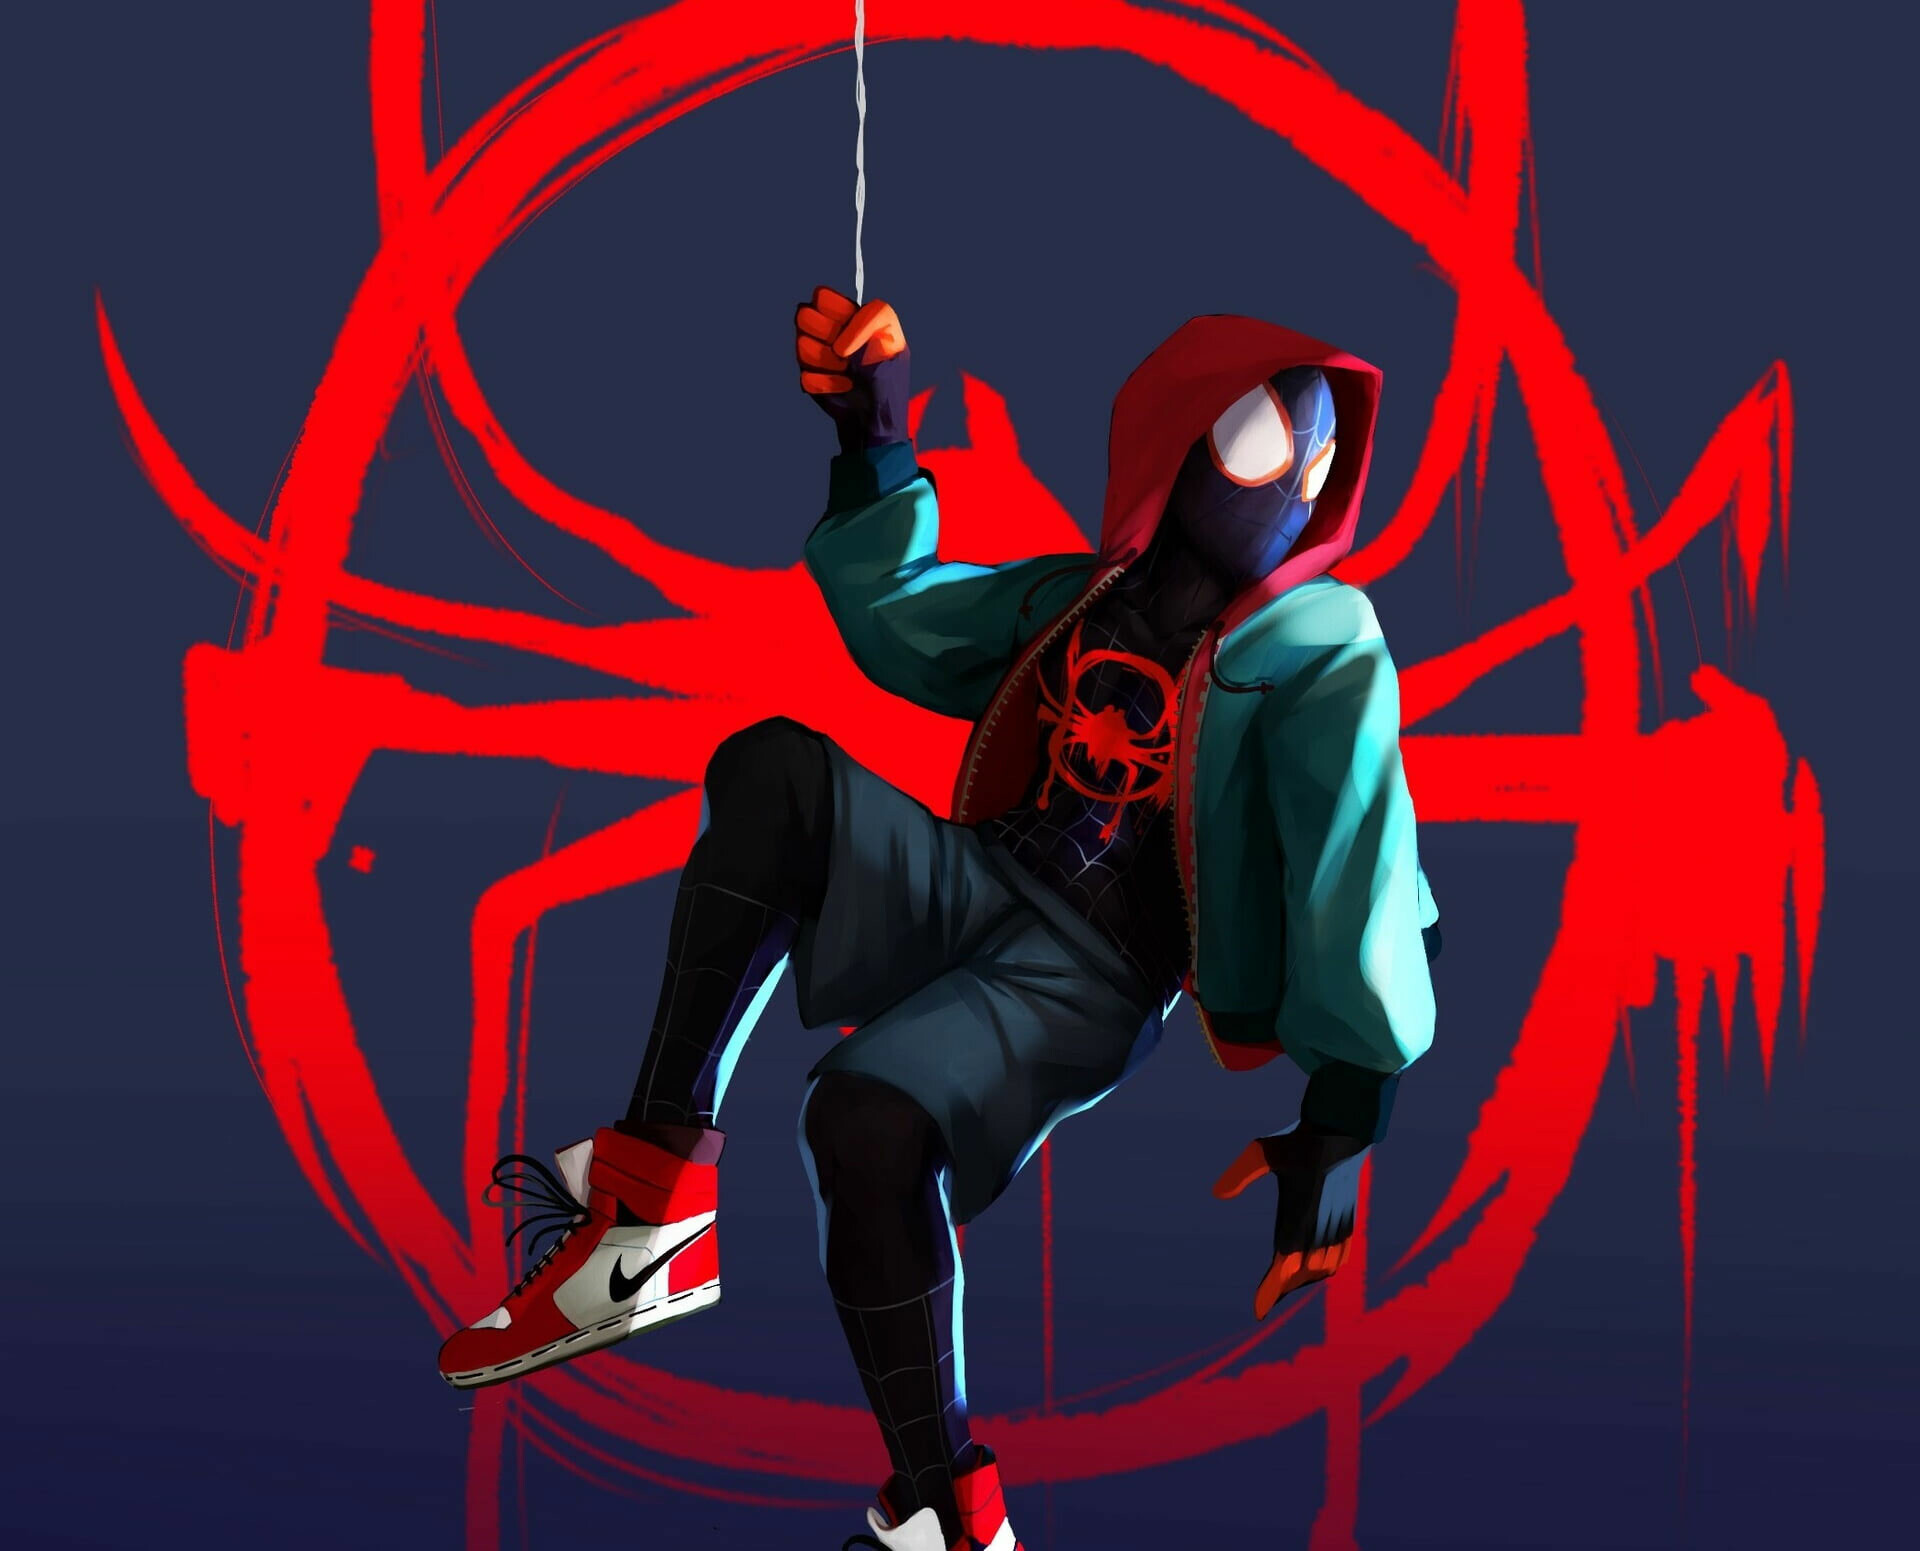 Spider-Man: Into the Spider-Verse: A 2018 American computer-animated superhero film. 1920x1560 HD Wallpaper.